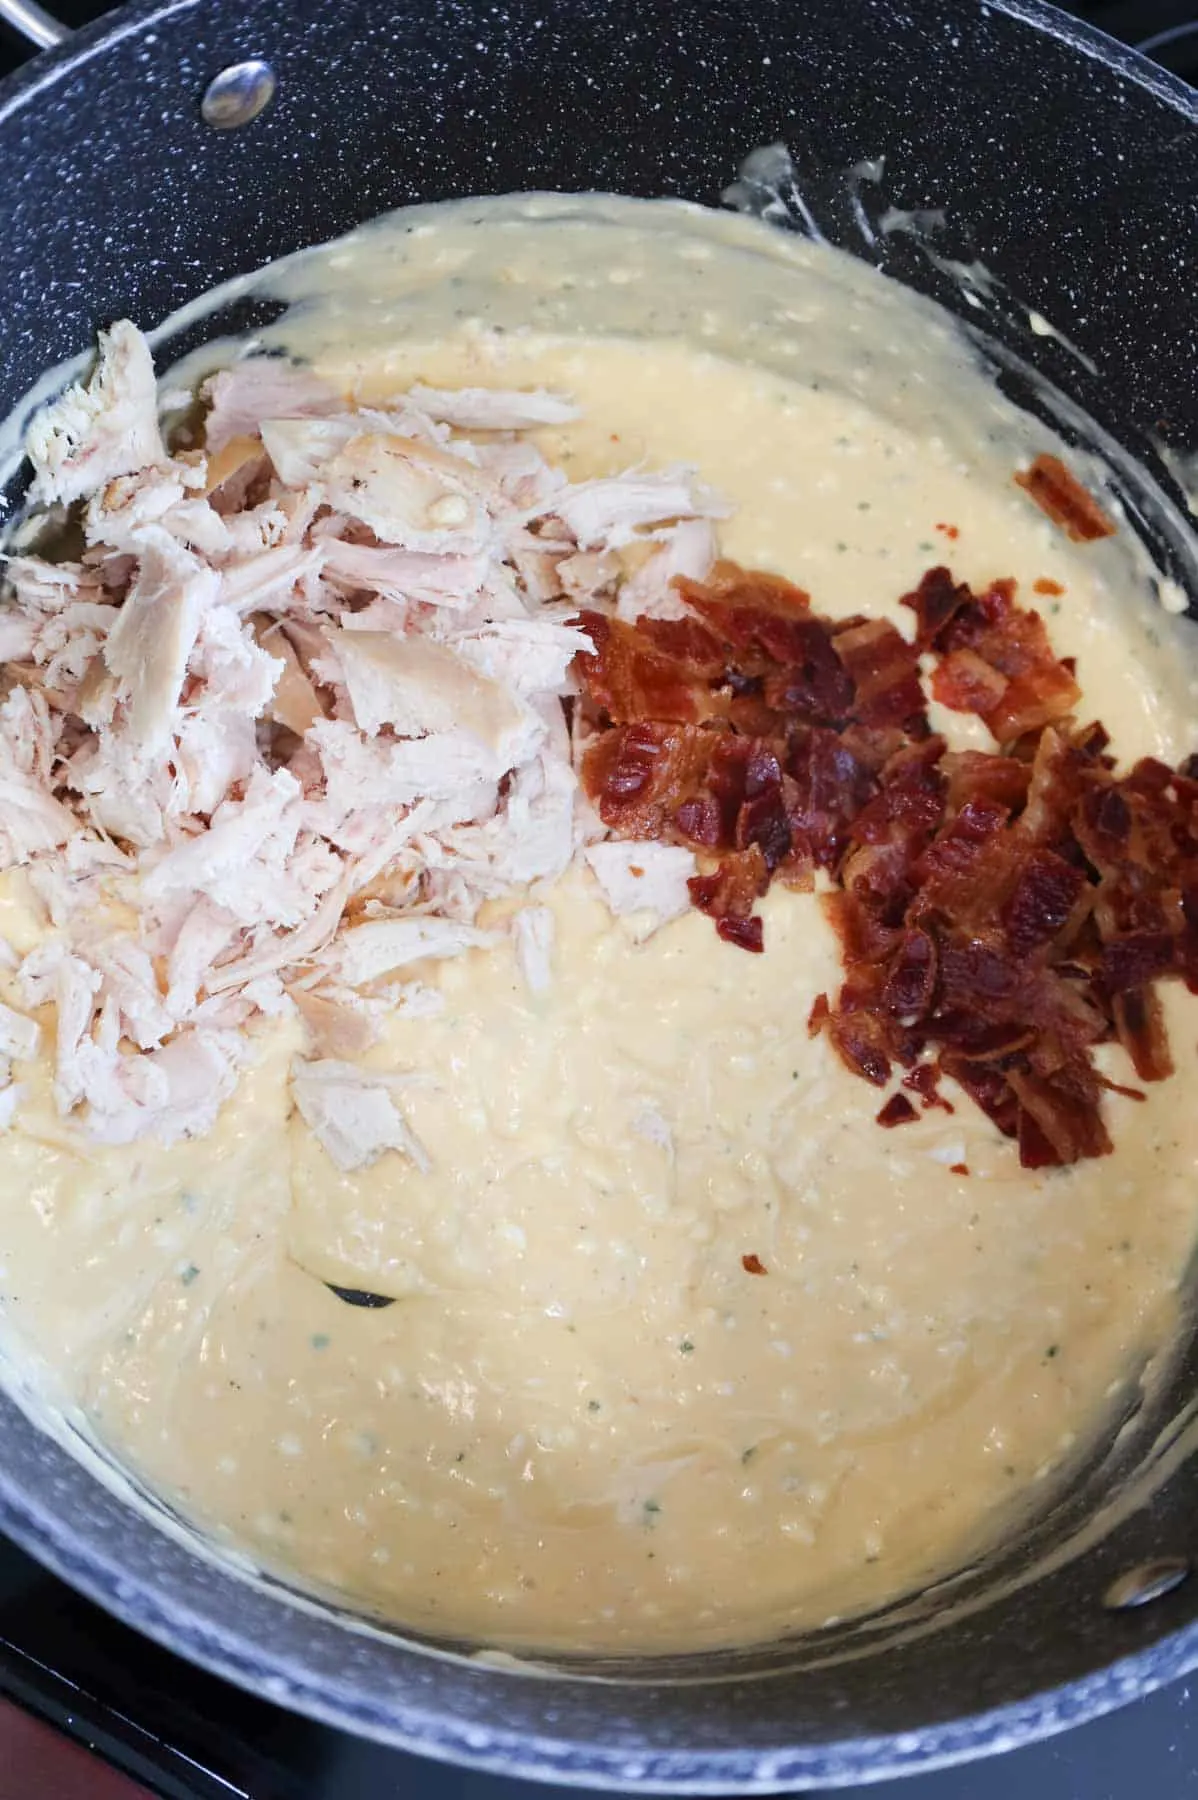 shredded chicken and crumbled bacon added to pot with cream sauce